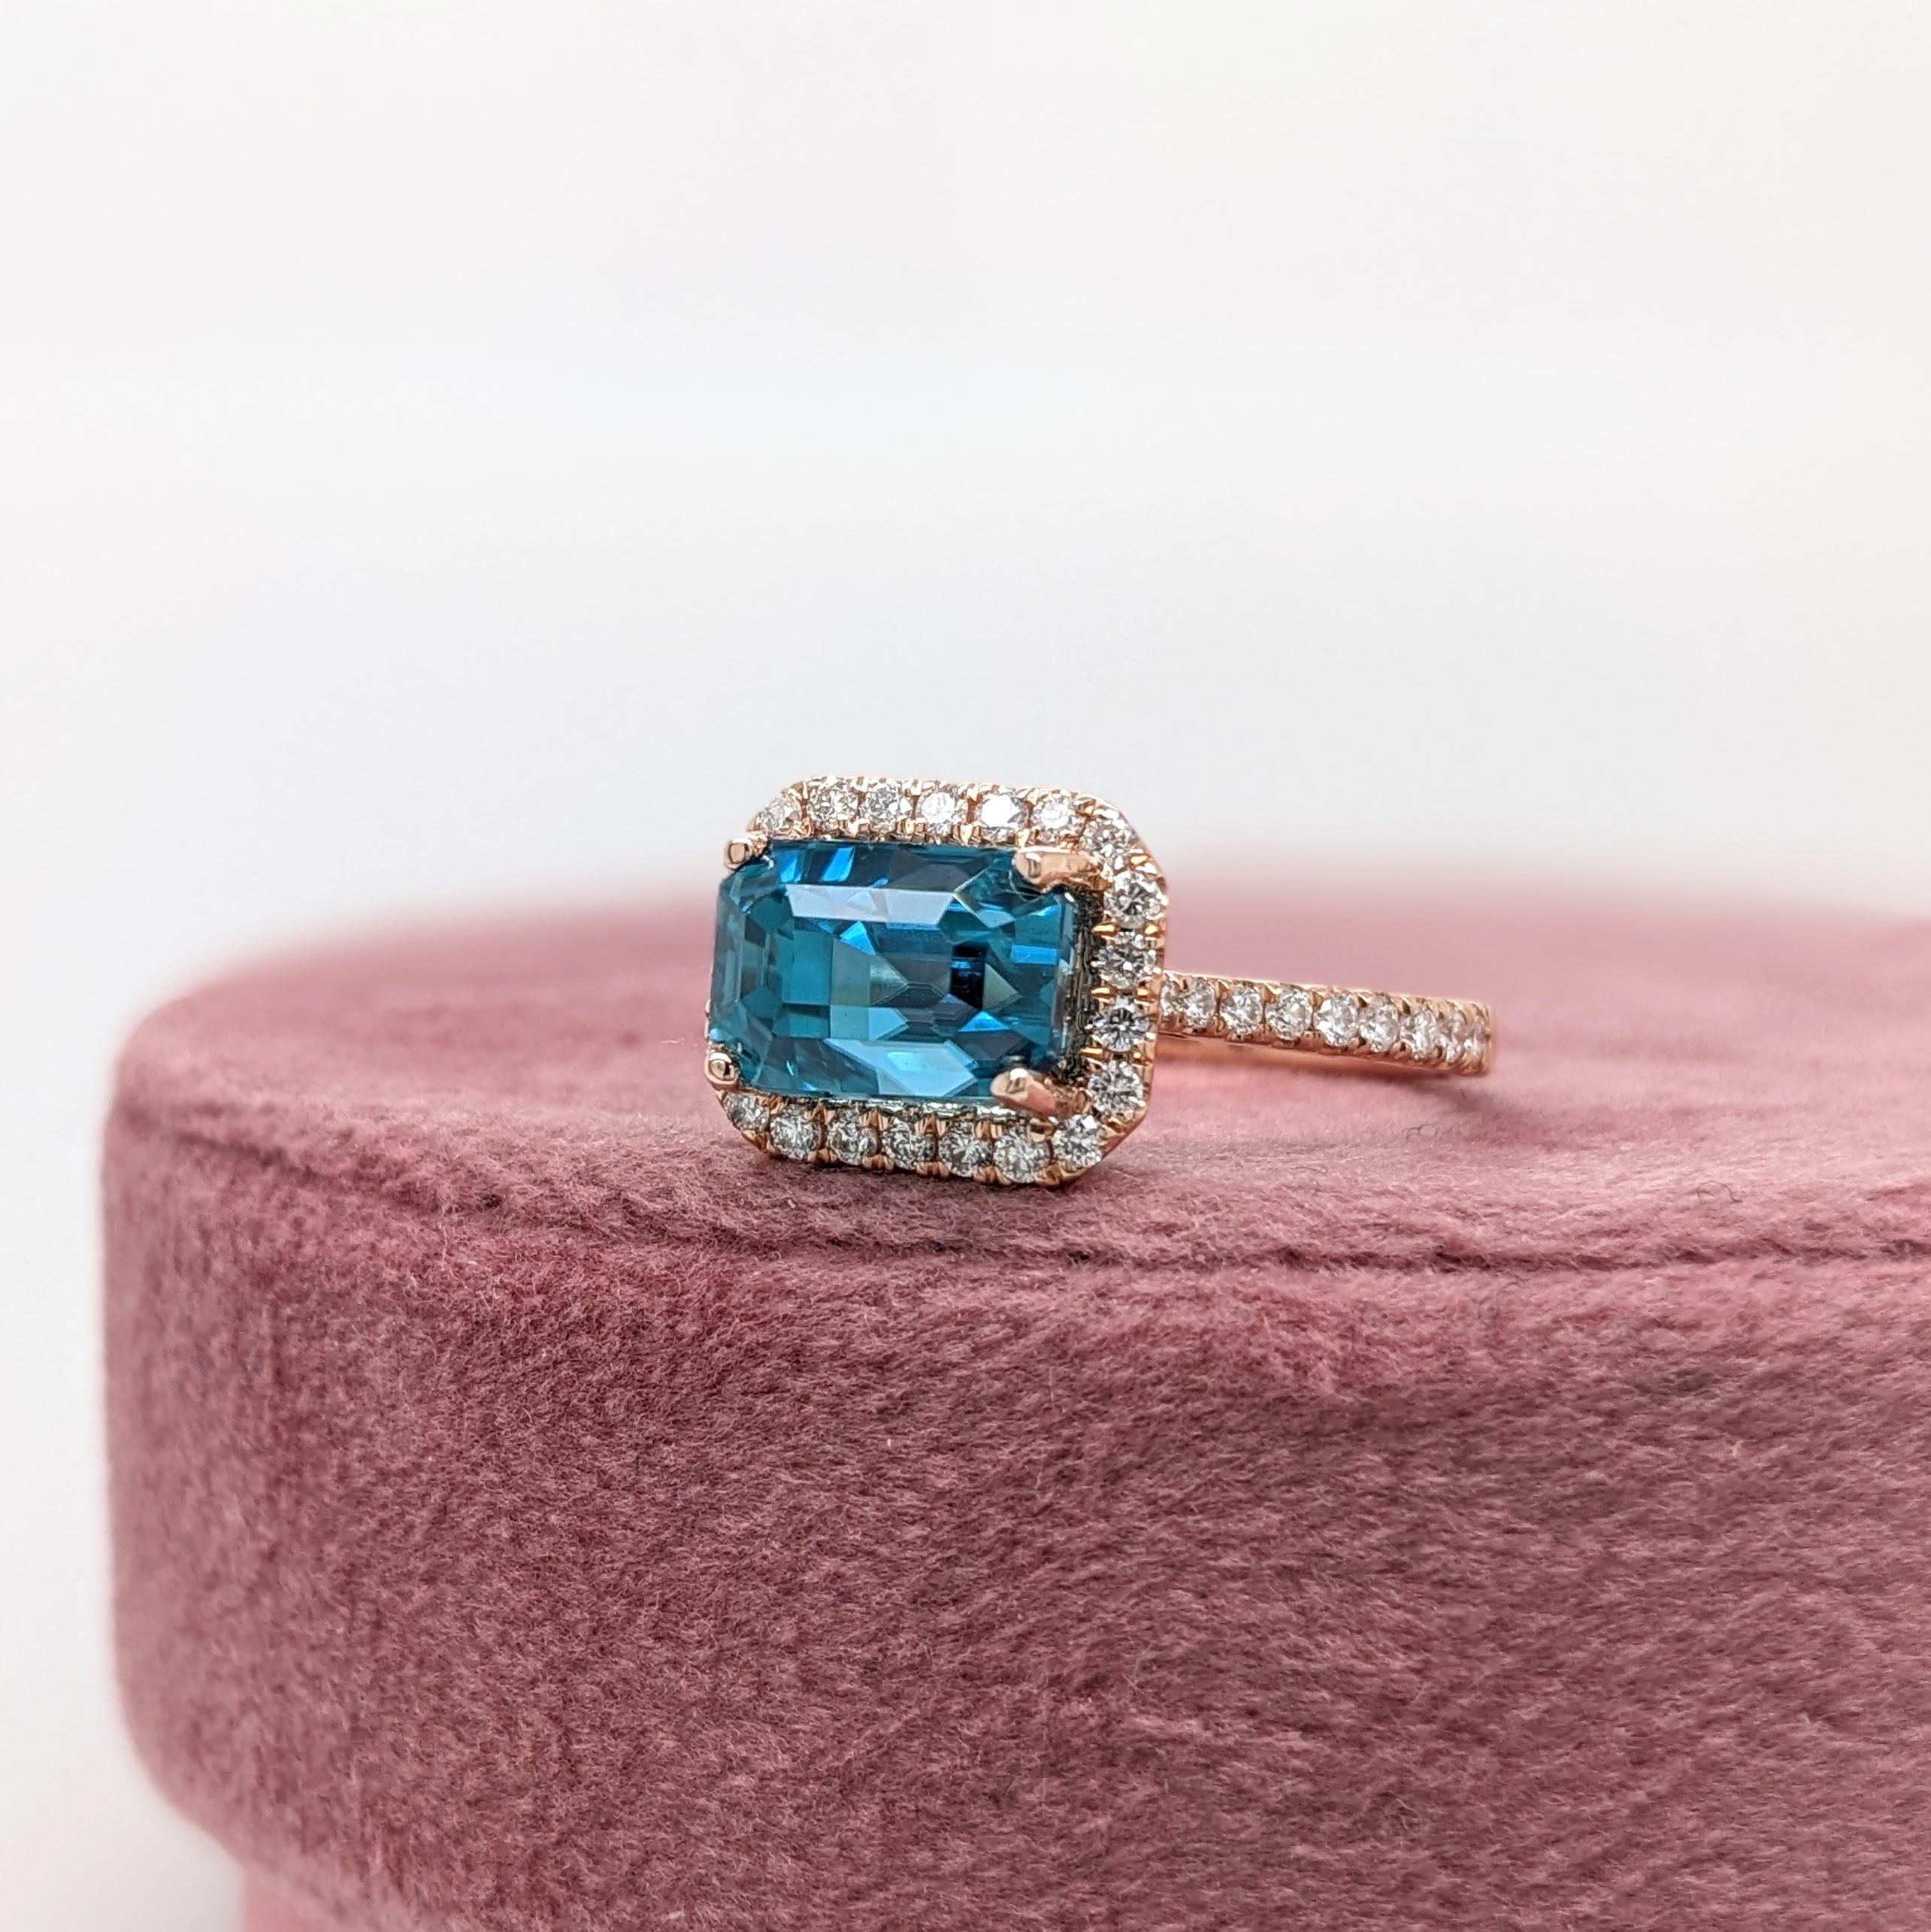 4.5ct Blue Zircon East West Ring w Natural Diamonds in Solid 14K Gold EM 8x6mm In New Condition For Sale In Columbus, OH